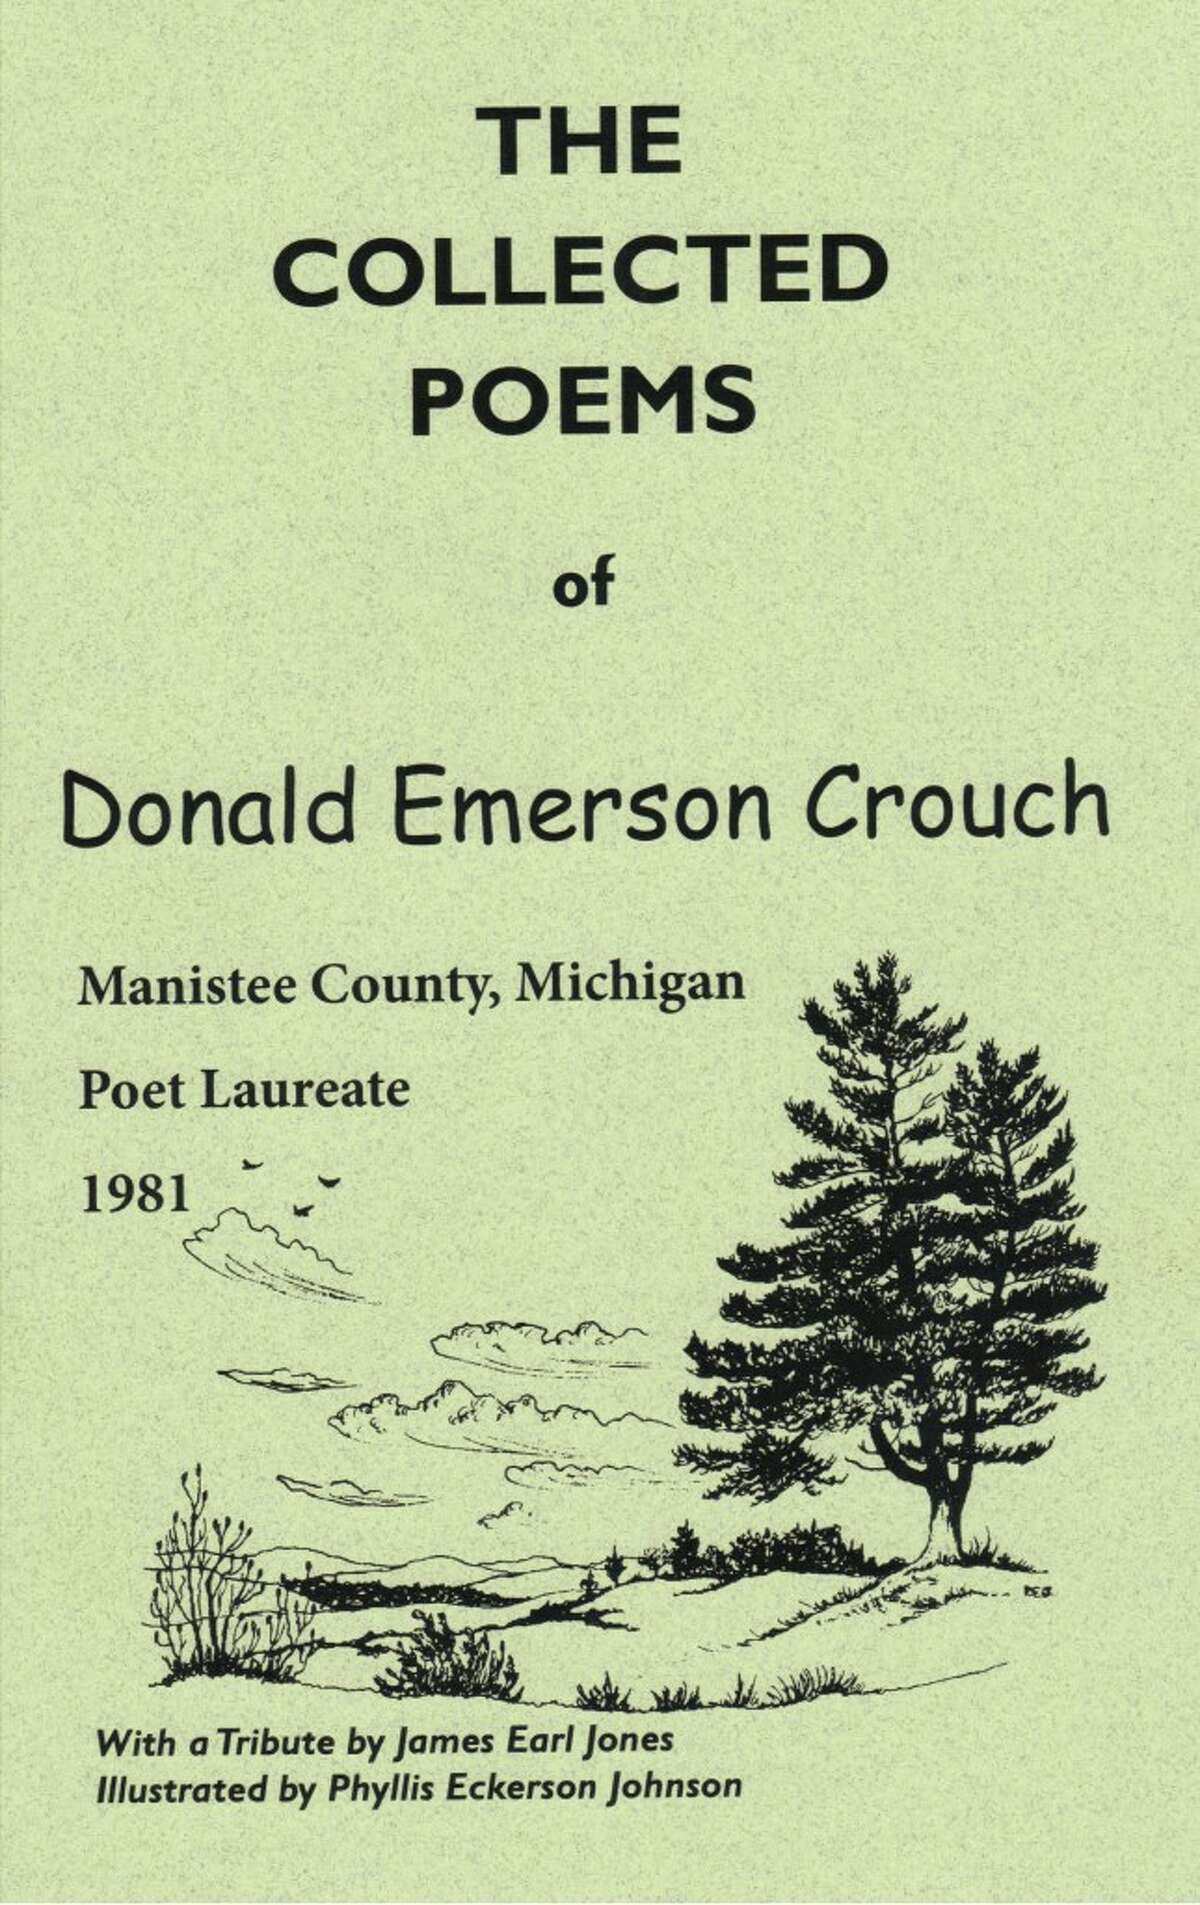 Shown is the cover of the book The collected Poems of Donald Emerson Crouch that will be sold in the funderaiser.(Courtesy photo)